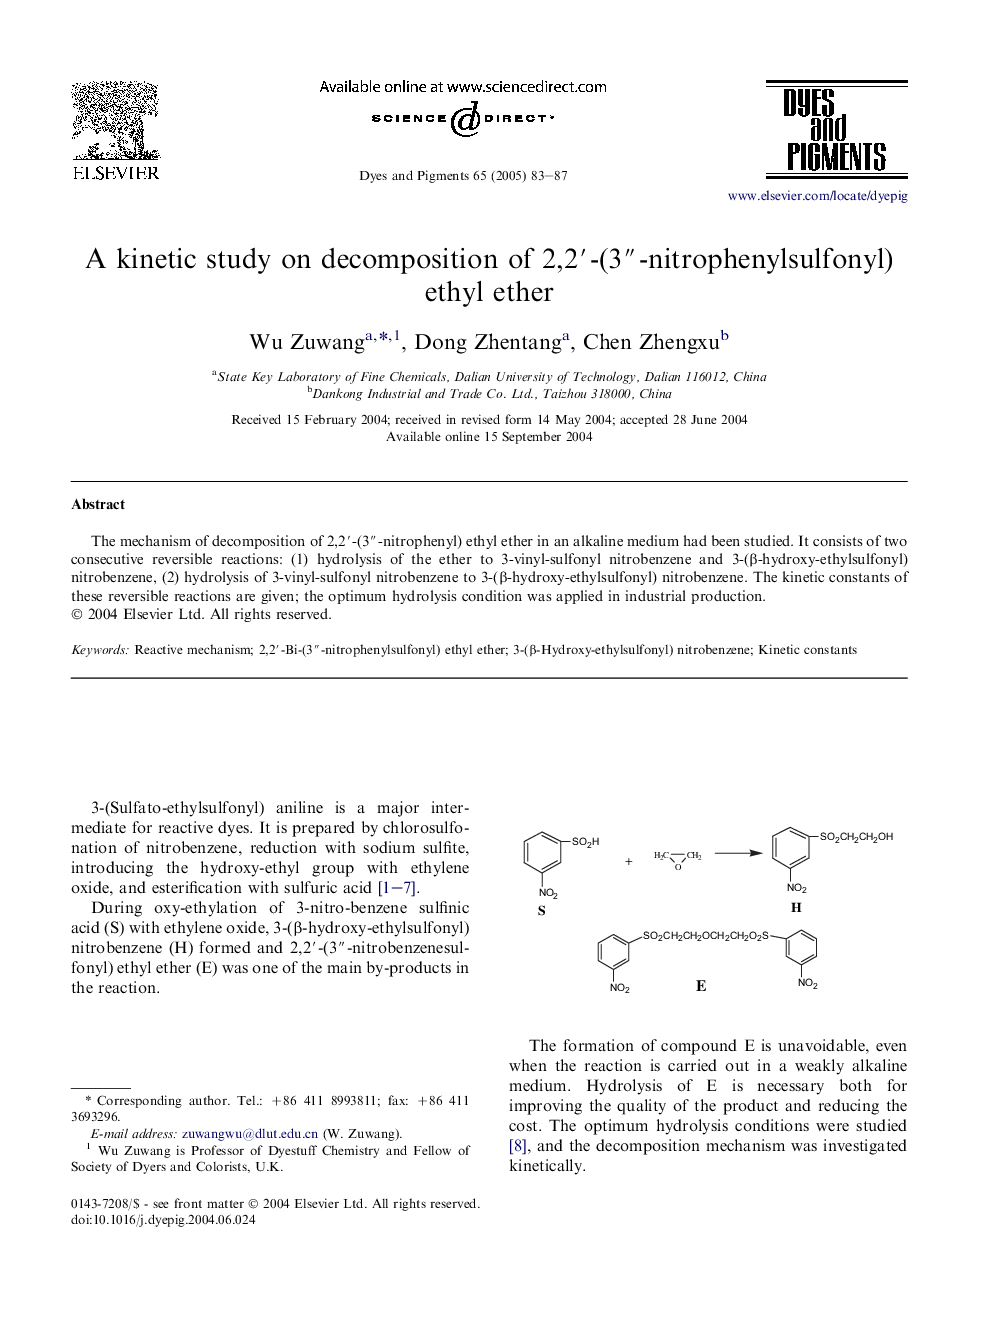 A kinetic study on decomposition of 2,2â²-(3â³-nitrophenylsulfonyl) ethyl ether